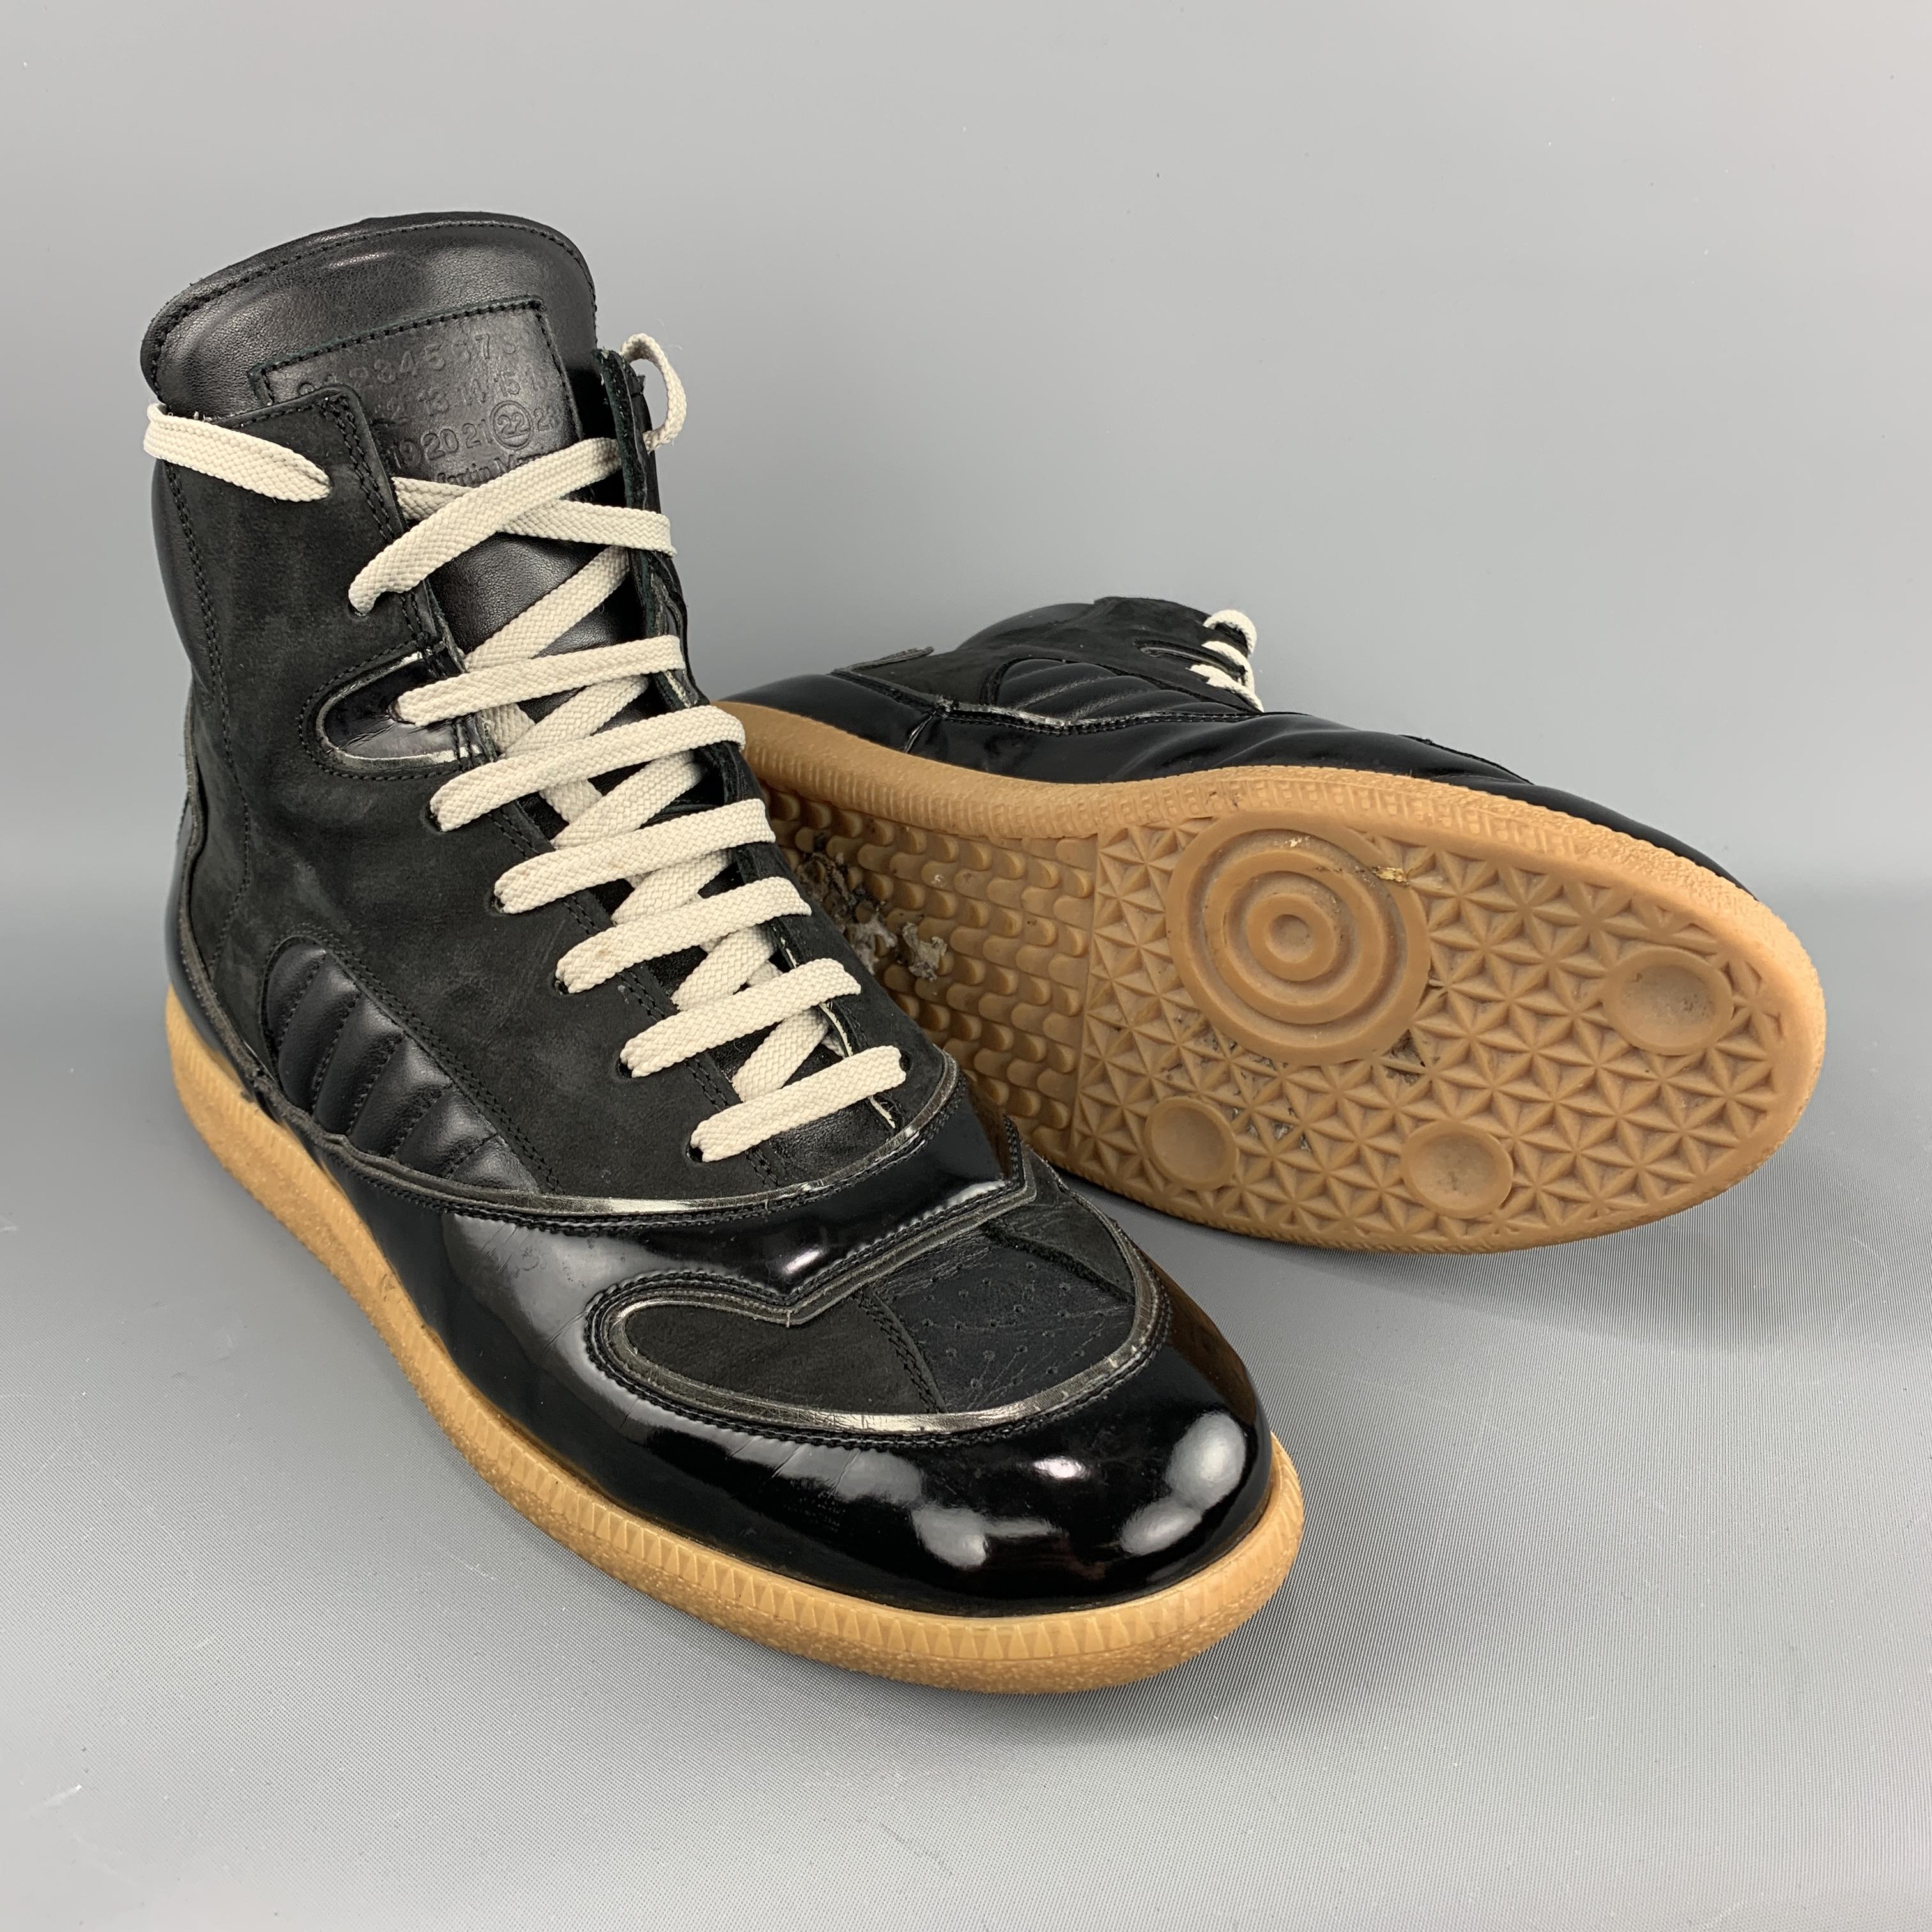 black patent leather high top sneakers